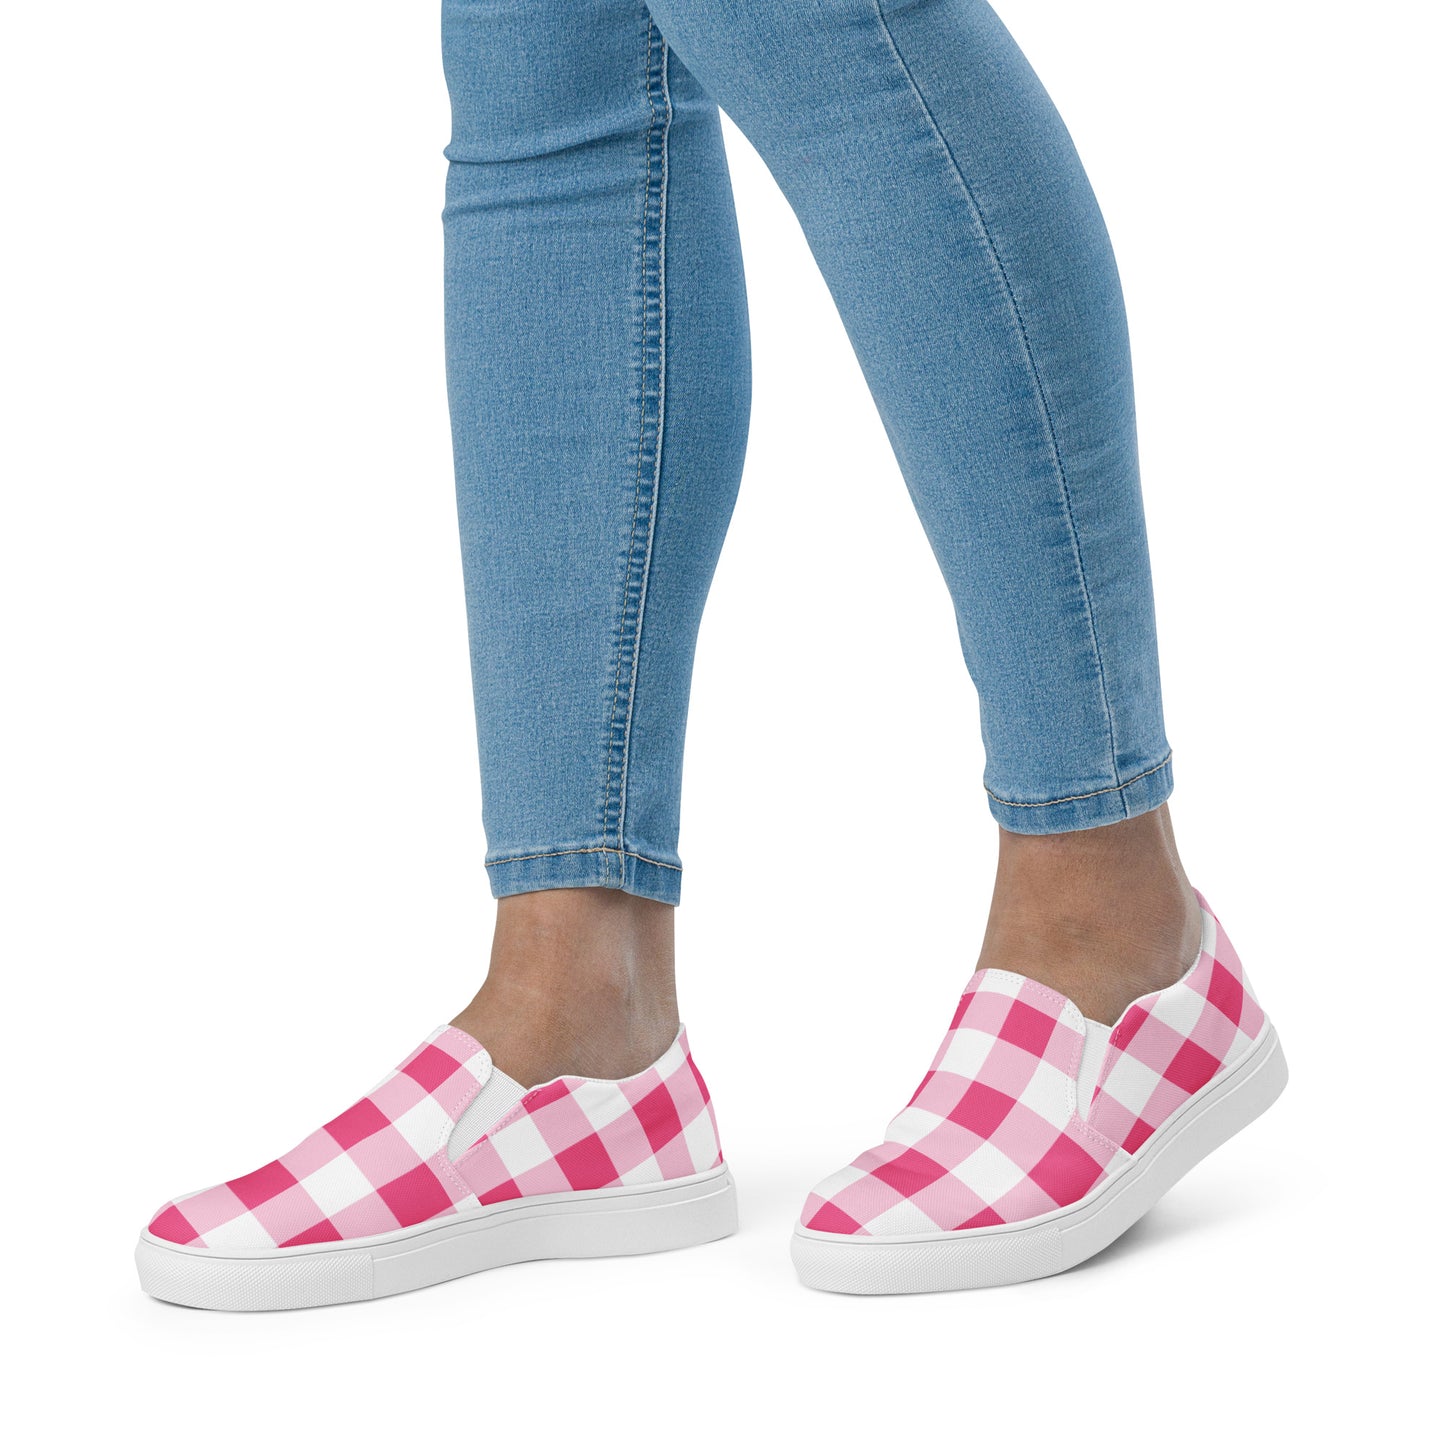 Everything Nice Pink Gingham Women’s Canvas Slip-On Flat Deck Shoes | Pinup Couture Relaxed